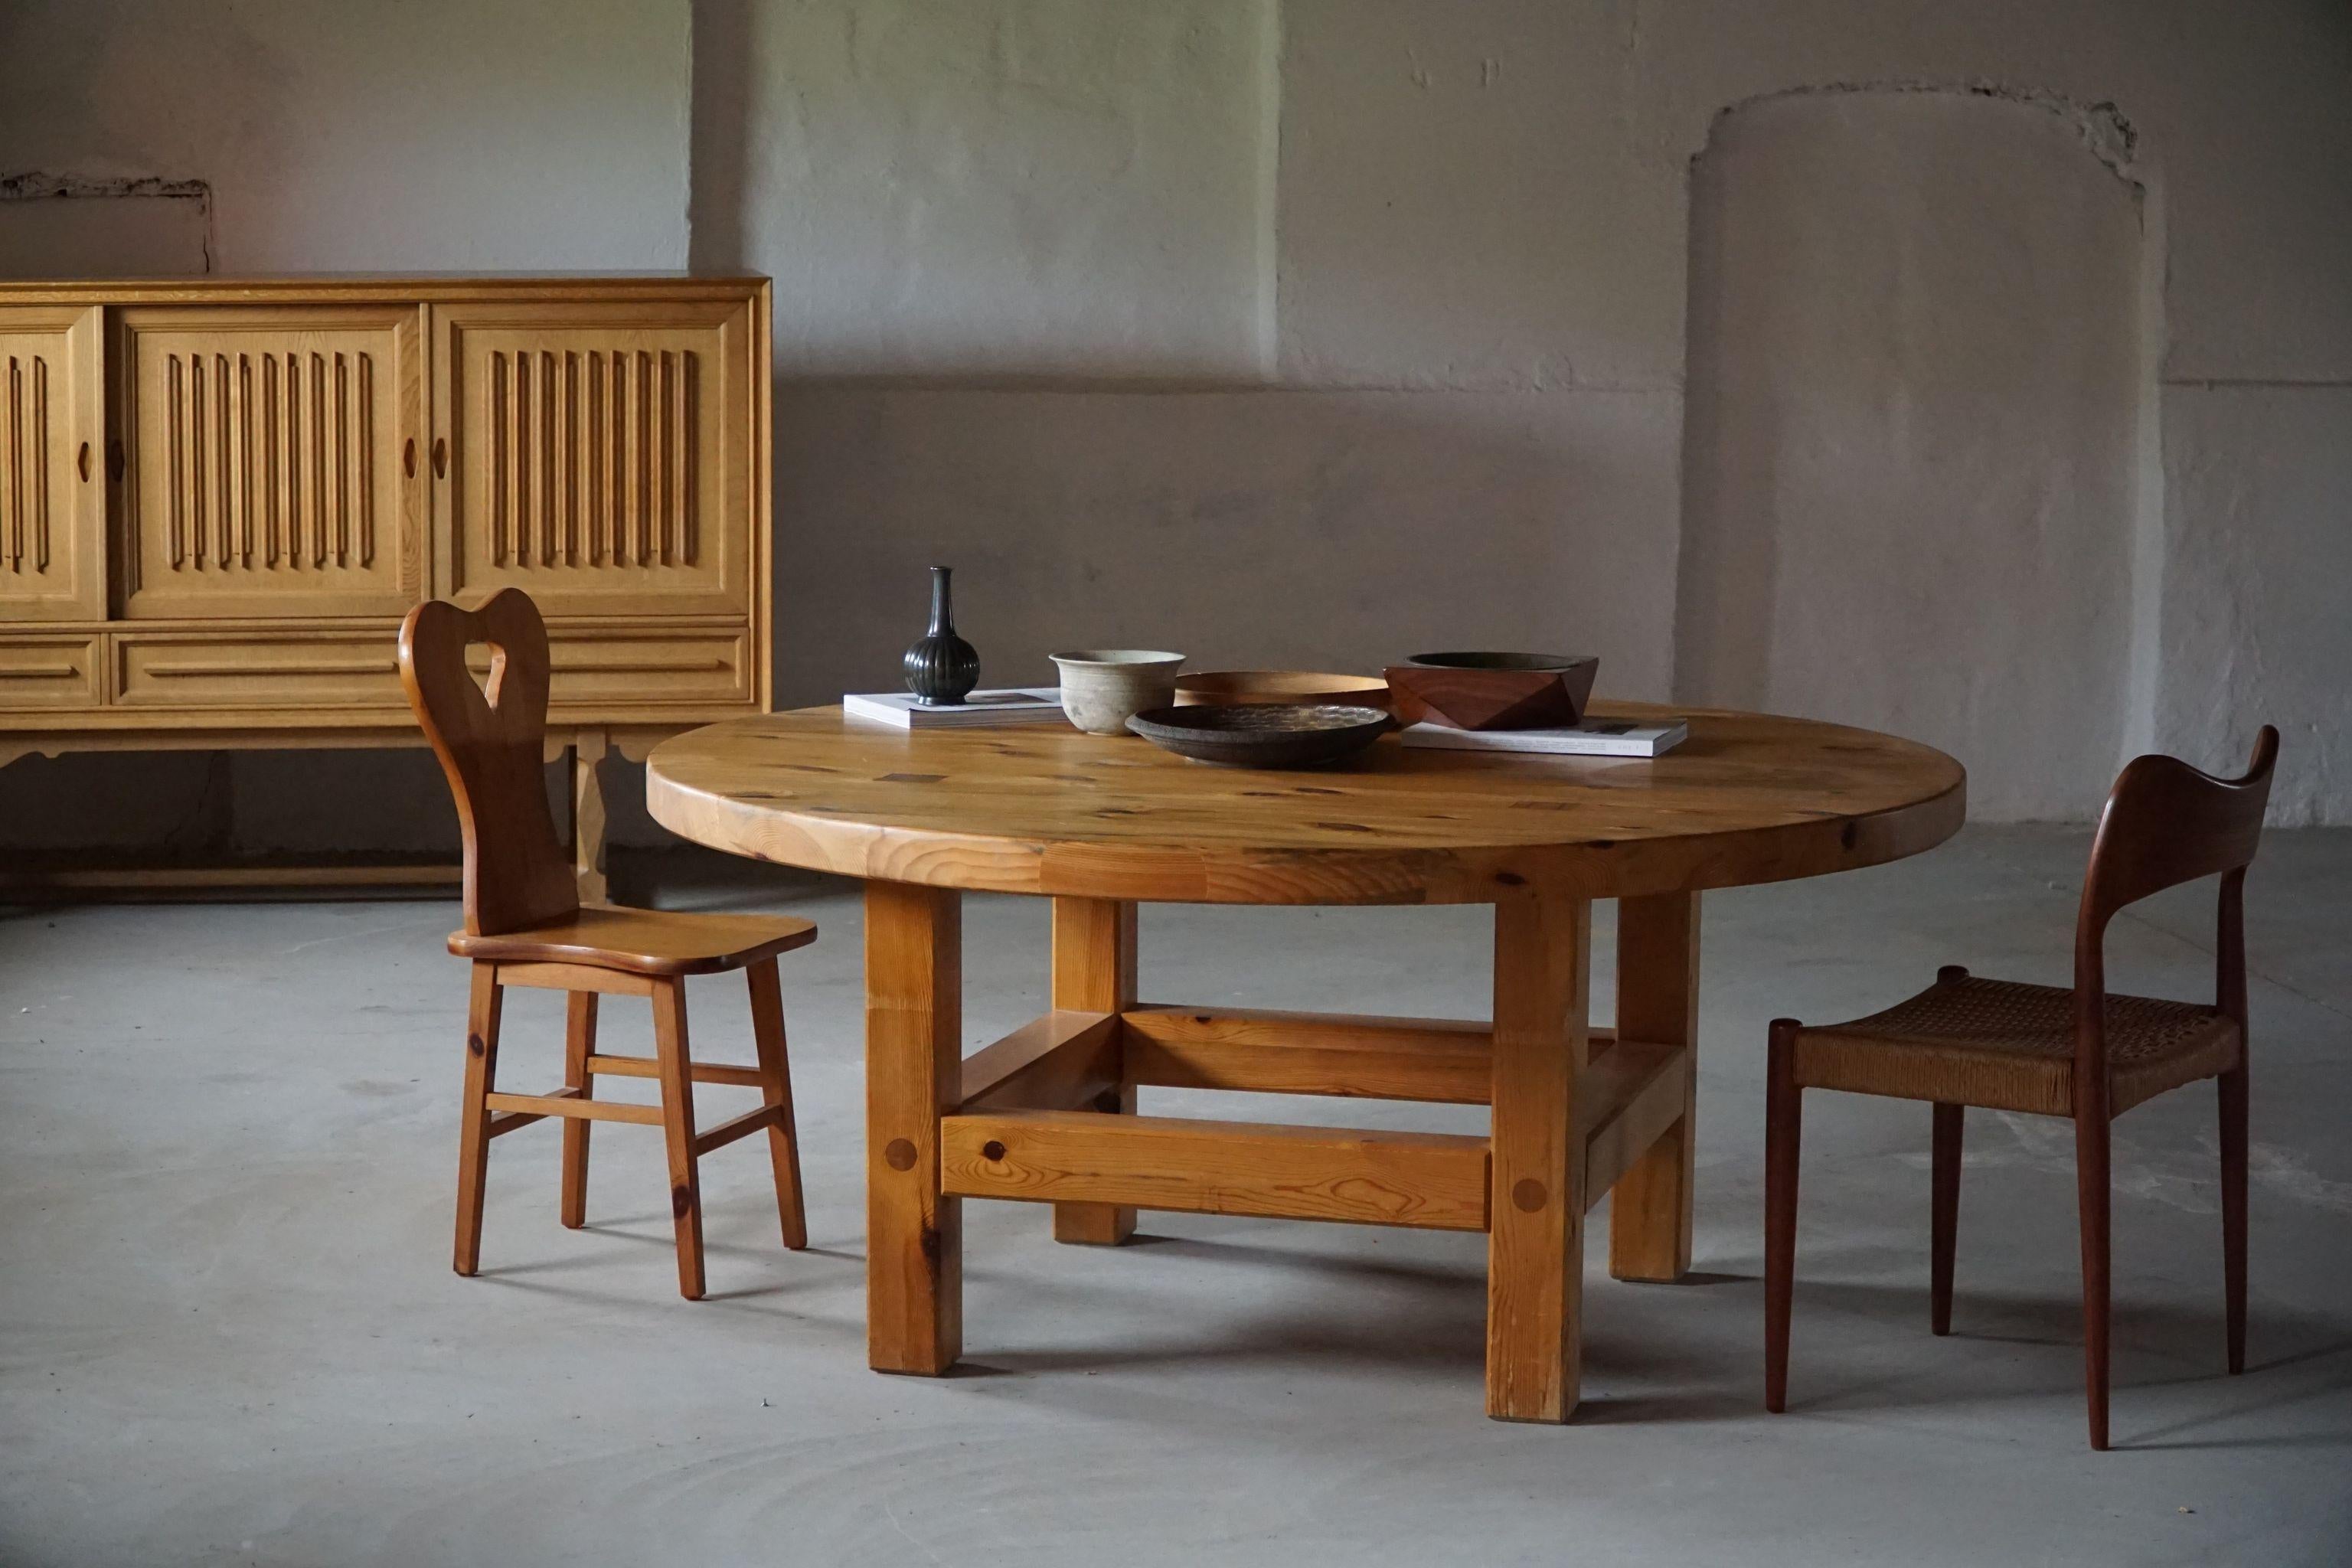 Large round dining table in solid pine by Swedish designer Sven Larsson. Great craftmanship and such nice details visible shown in this fine brutalist table.

A warm colour and patina that pair well with the minimalist scandinavian lifestyle.